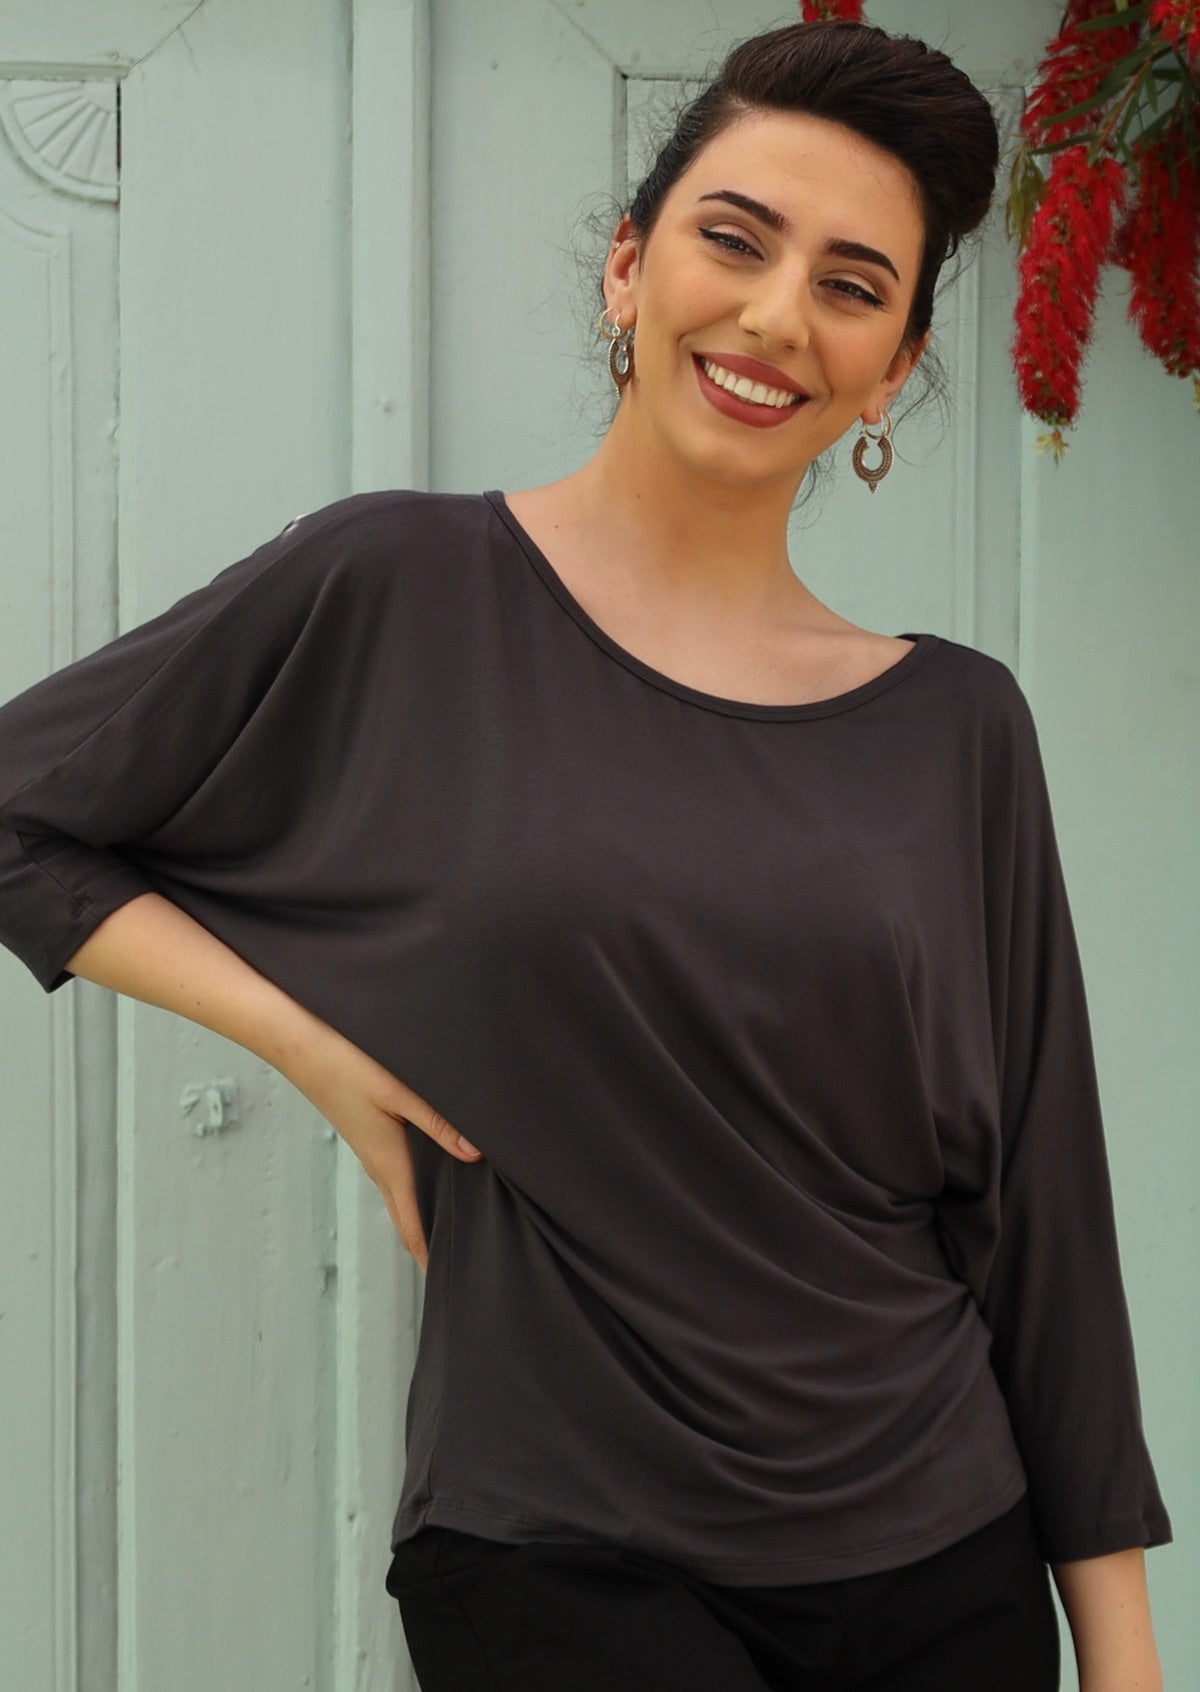 Woman wearing a 3/4 sleeve rayon batwing round neckline dark grey top in front of grey wall.